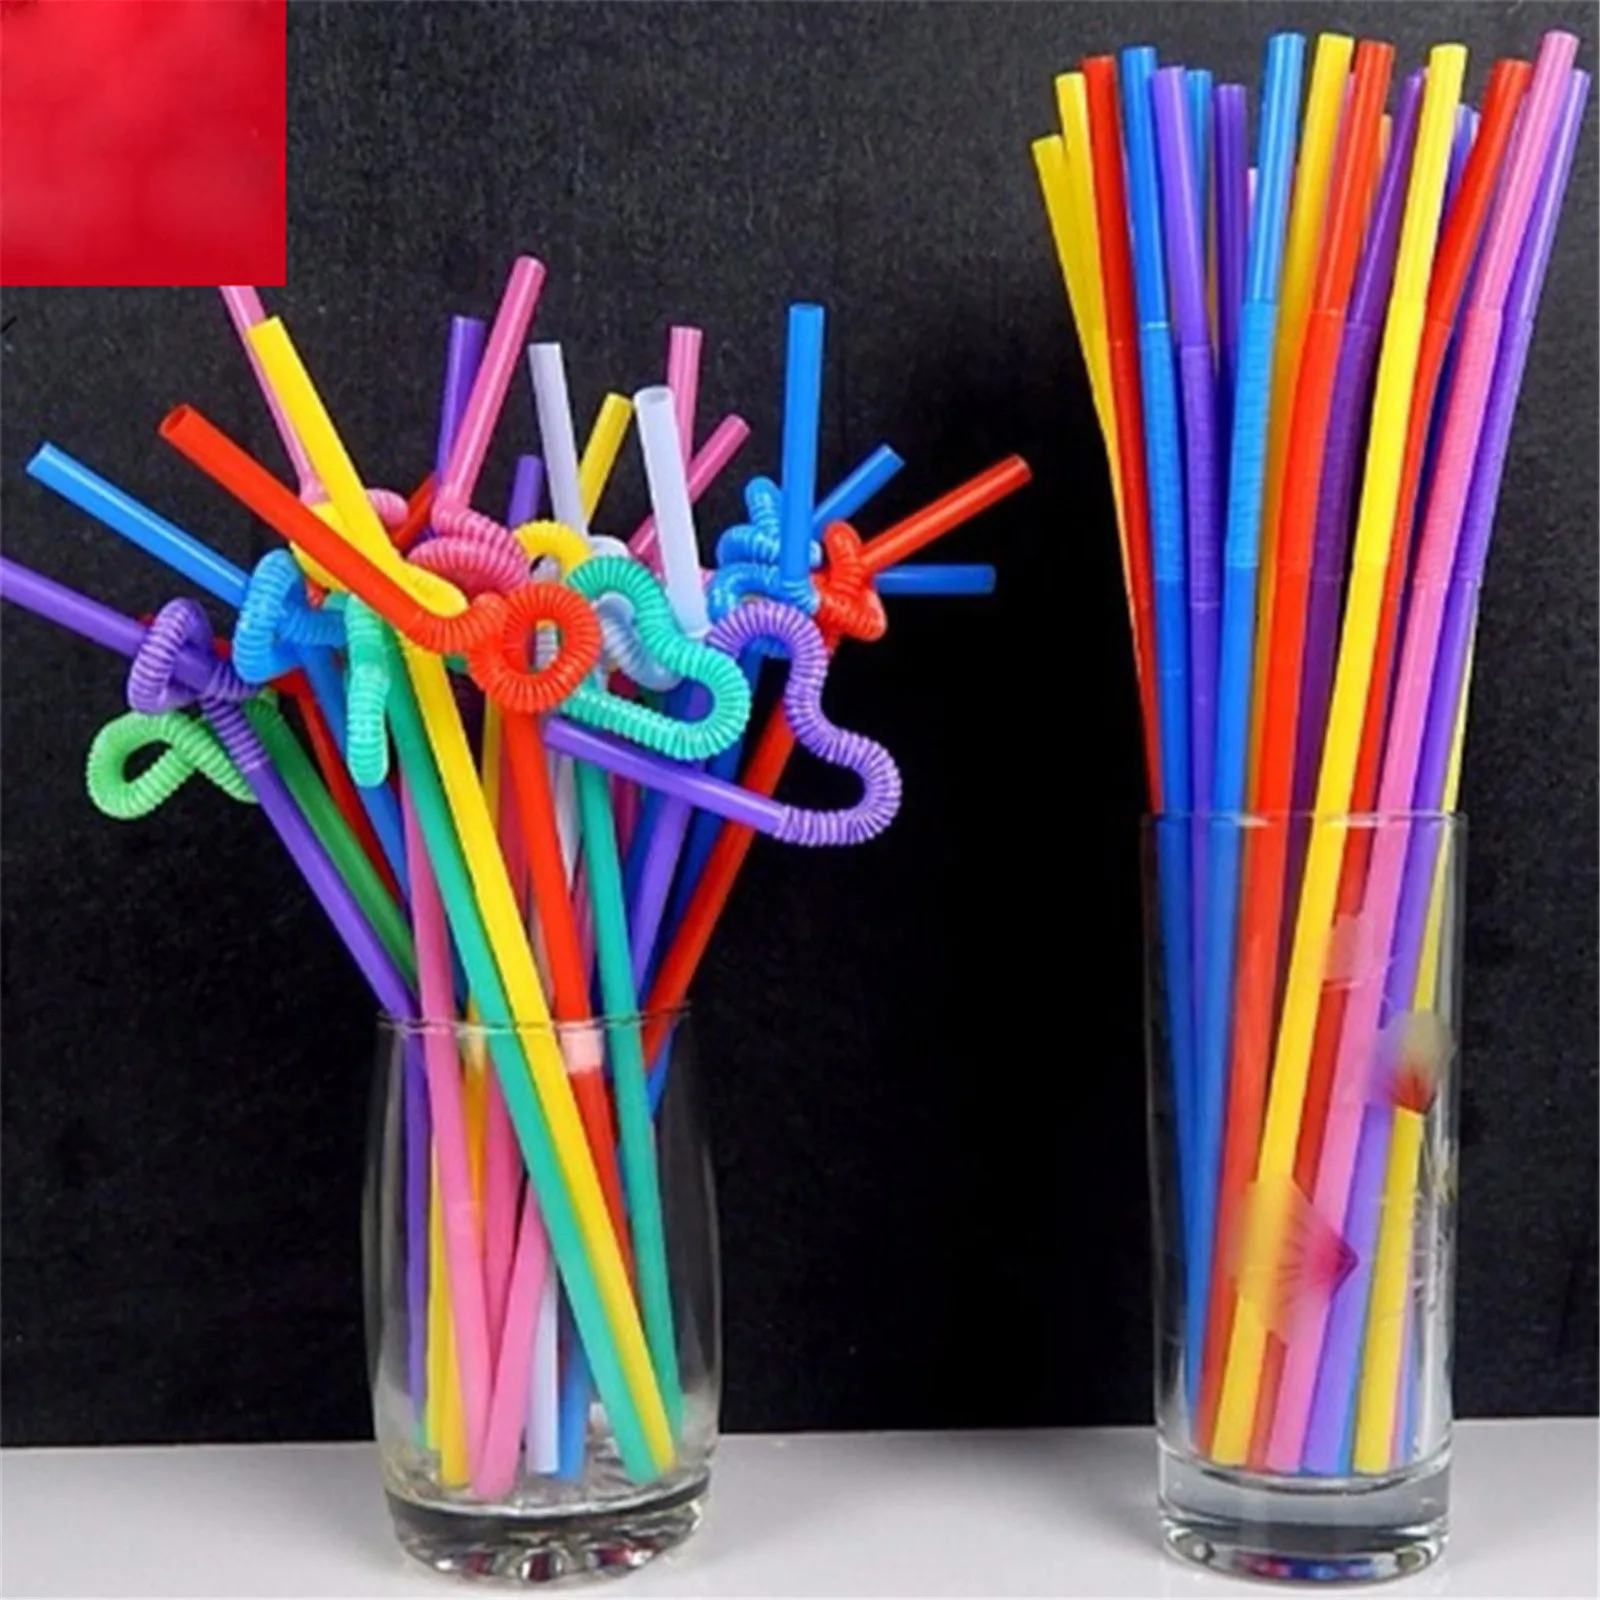 

1000PCS Disposable Plastic Drinking Straws Multi-Colored Solid Bendable Elbow Straws Party Event Alike Supplies Color Random